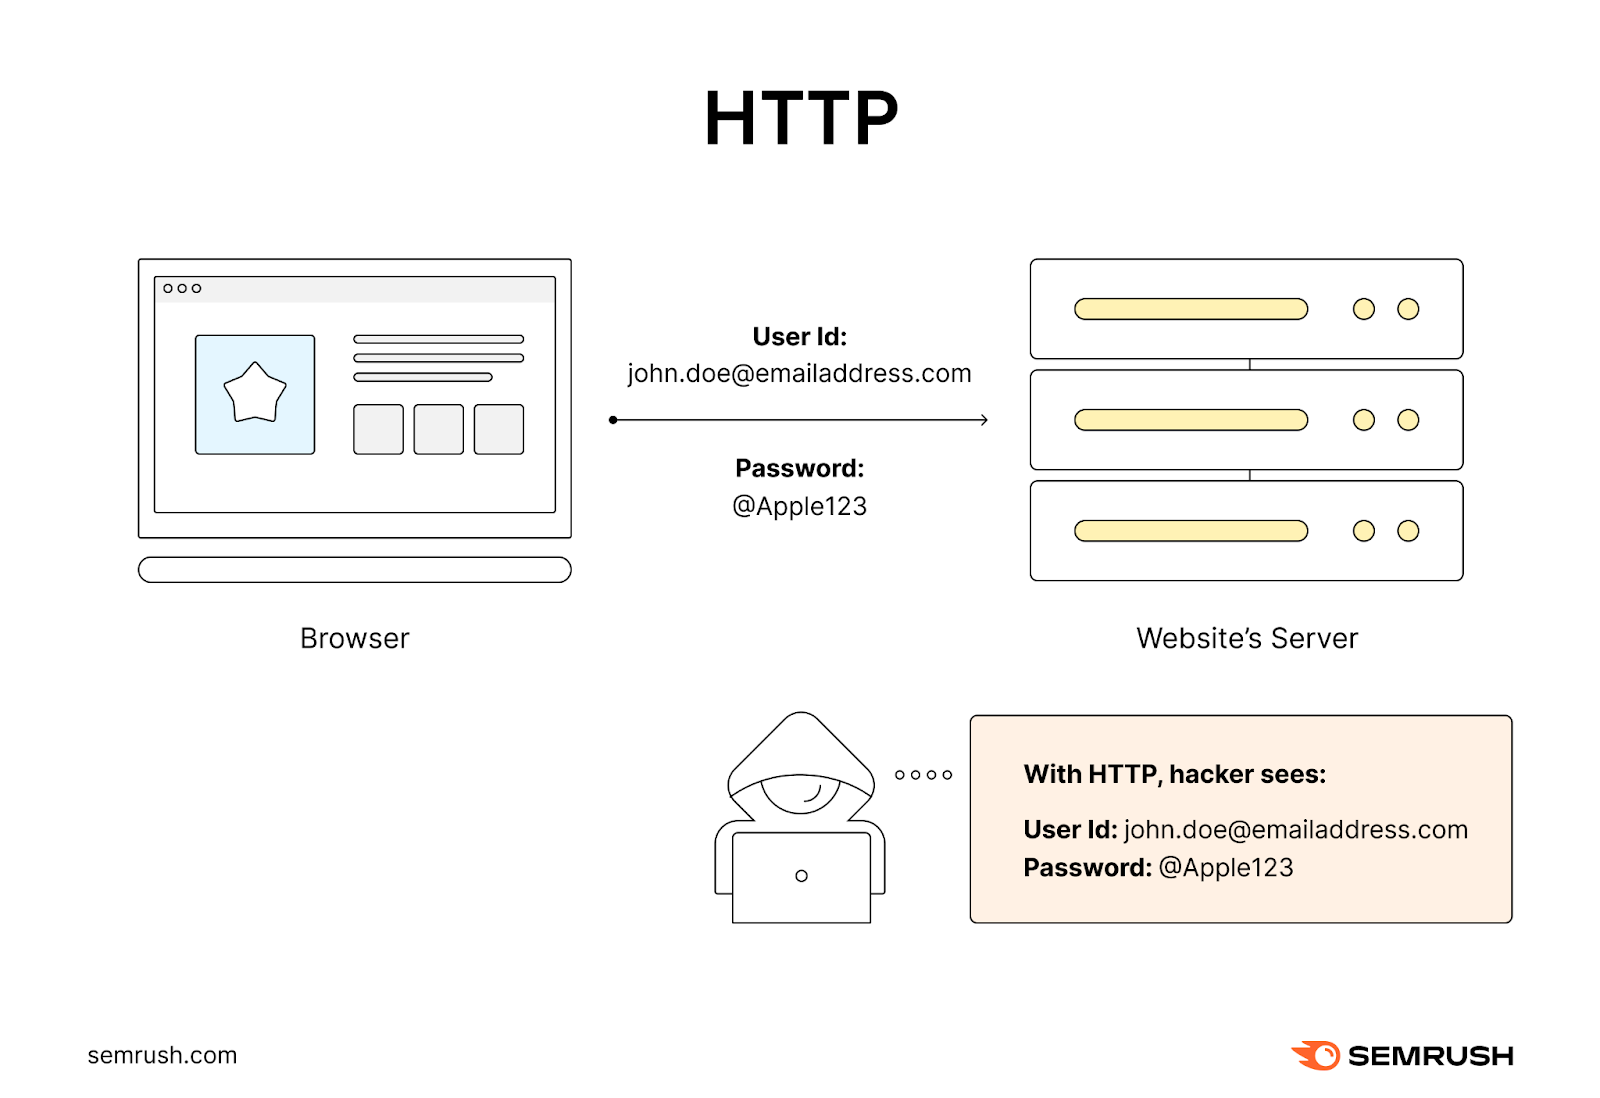 HTTP transfers data as plain text, making the user id and password easy to intercept